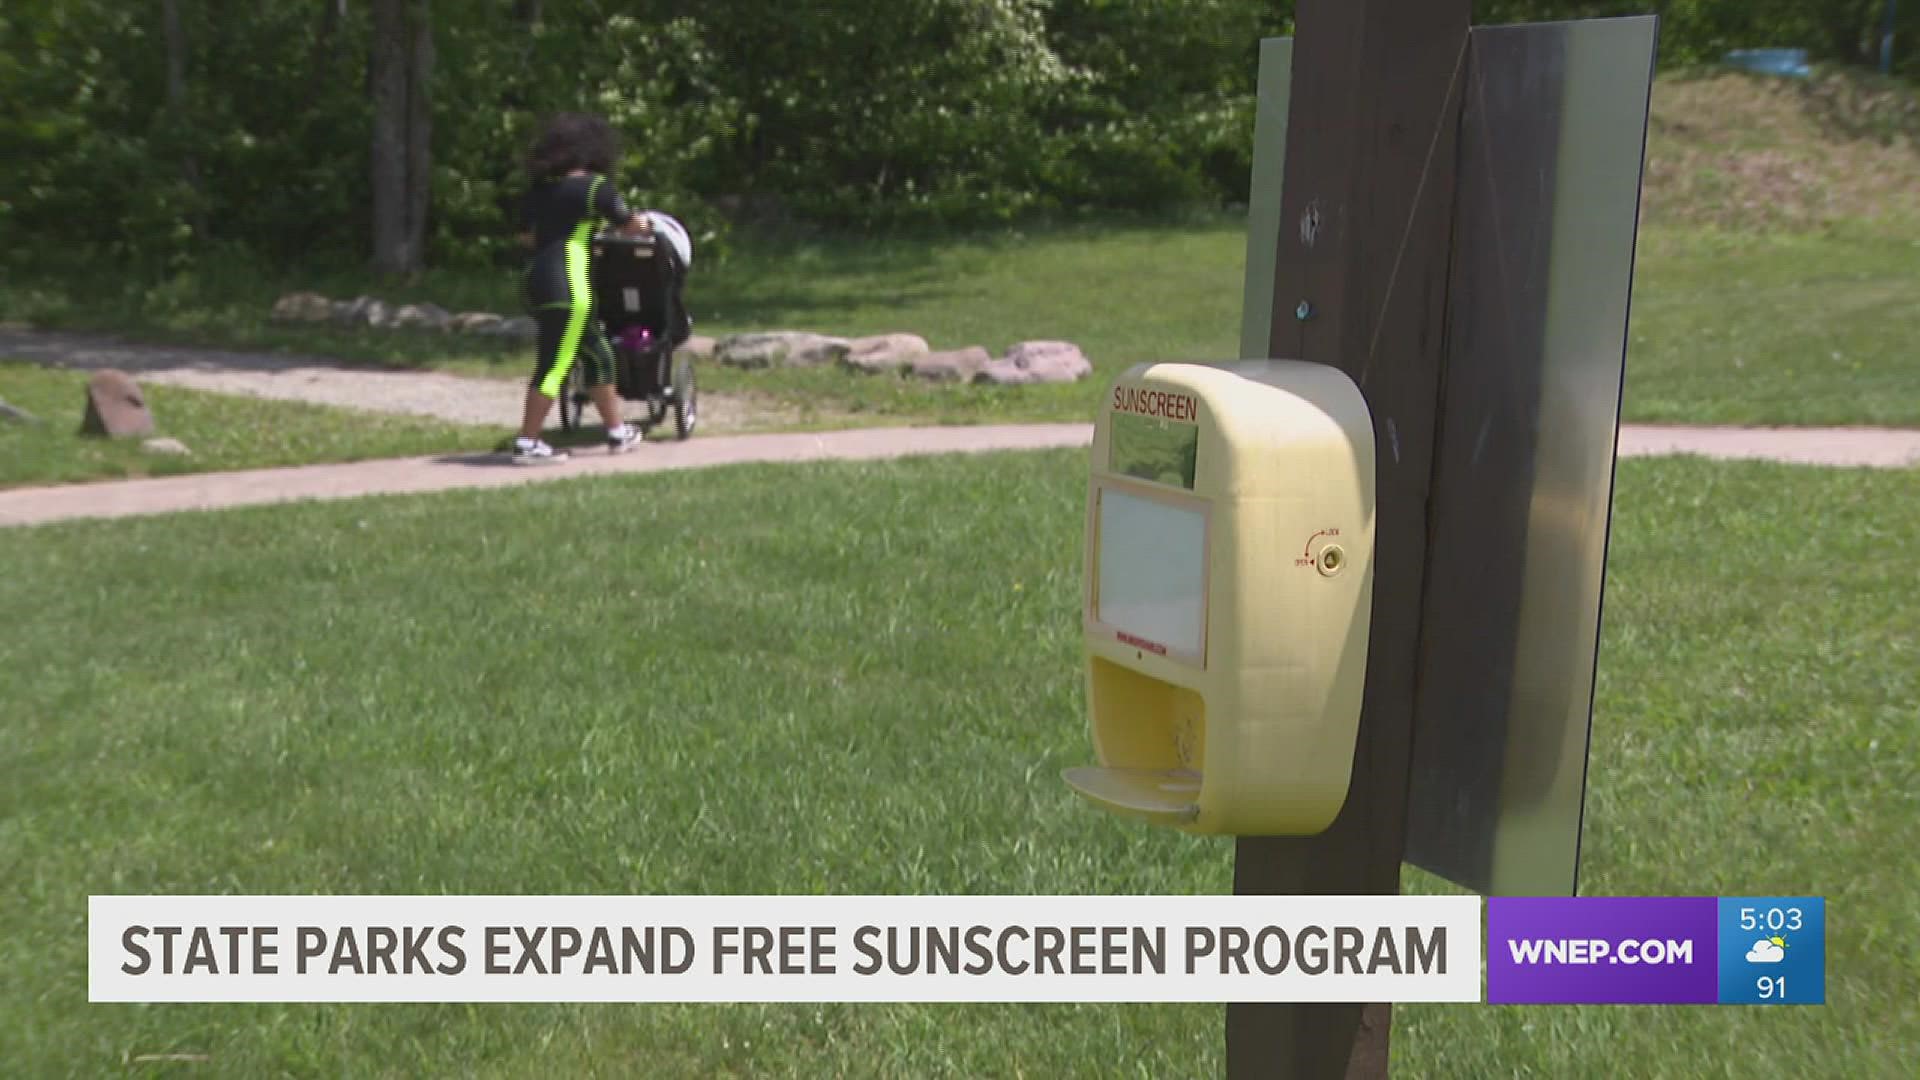 The Pennsylvania Department of Conservation and Natural Resources is once again supplying free sunscreen to guests at state park beaches and swimming pools